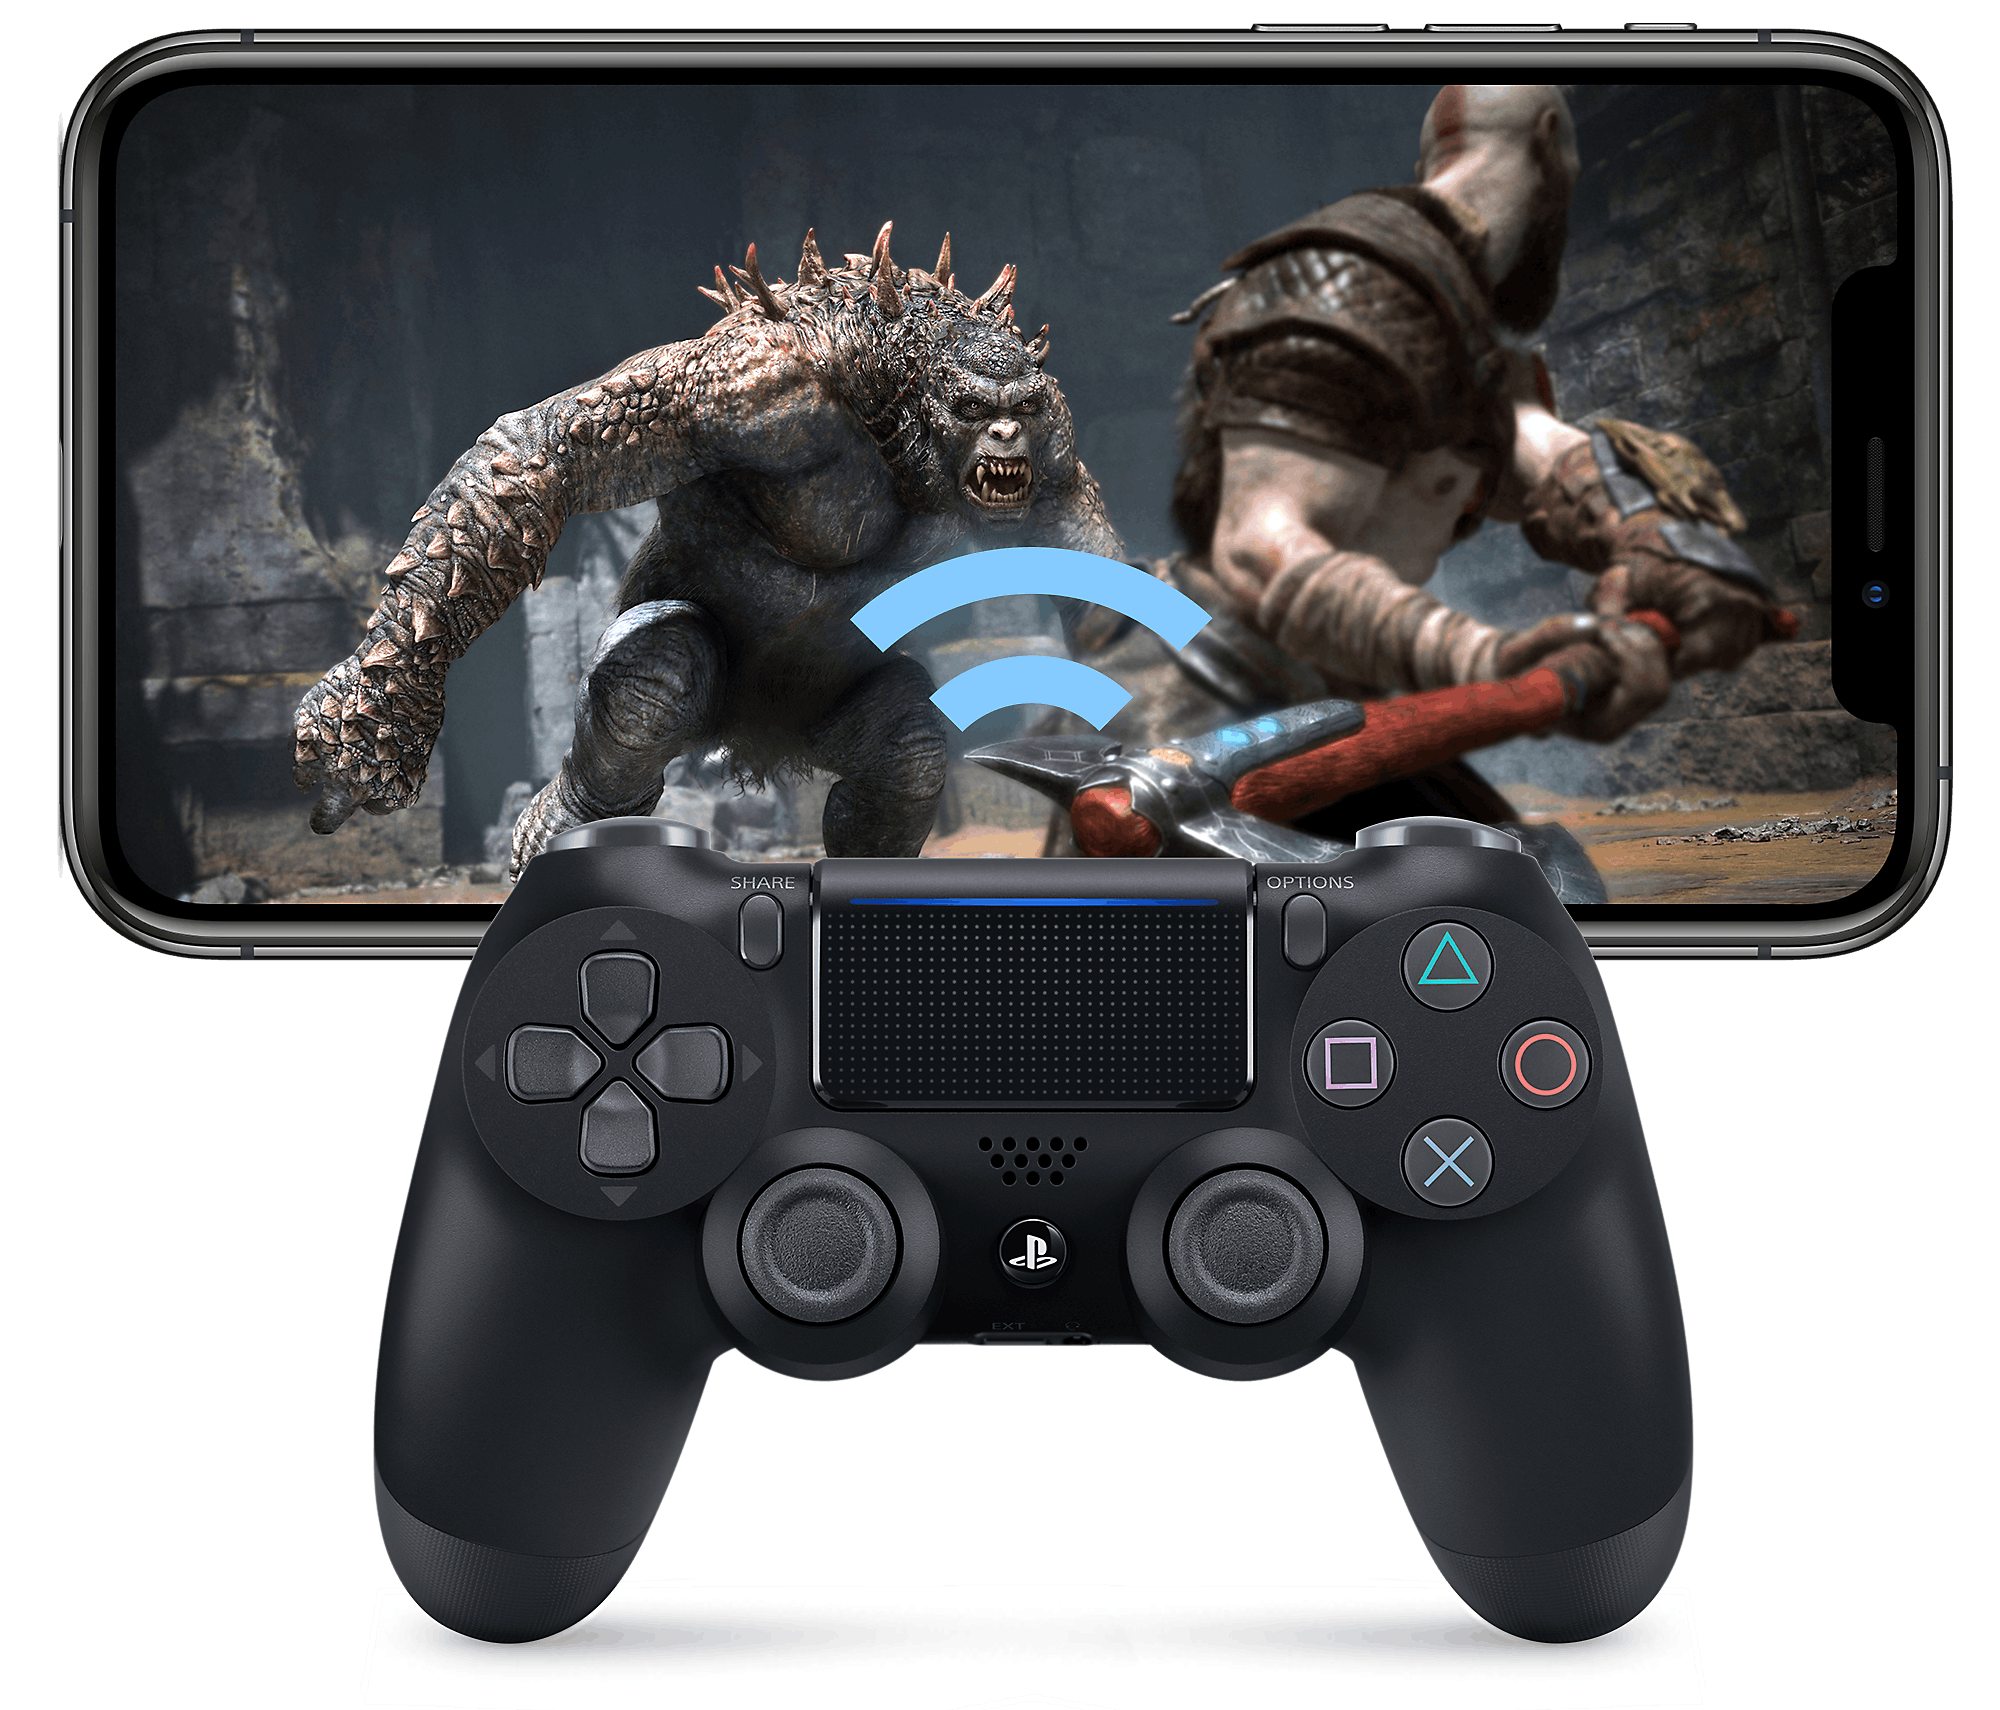 tjære Specialisere Brandy Ps4 Remote Play Pc With Keyboard And Mouse Shop, 48% OFF | eaob.eu